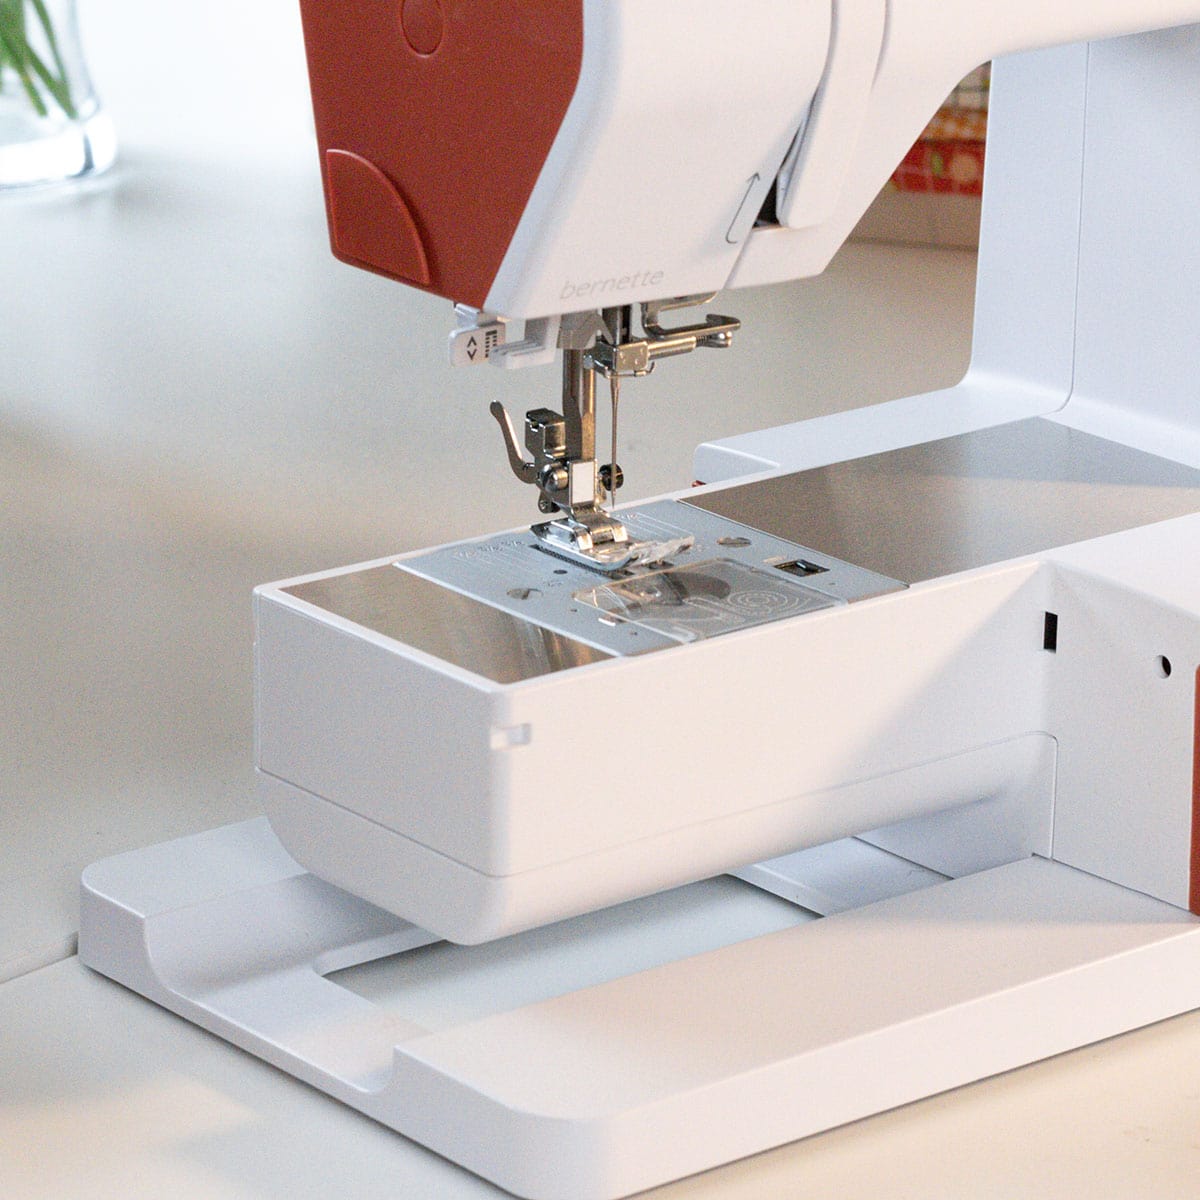 Bernette 05 Crafter Heavy Duty Sewing Machine